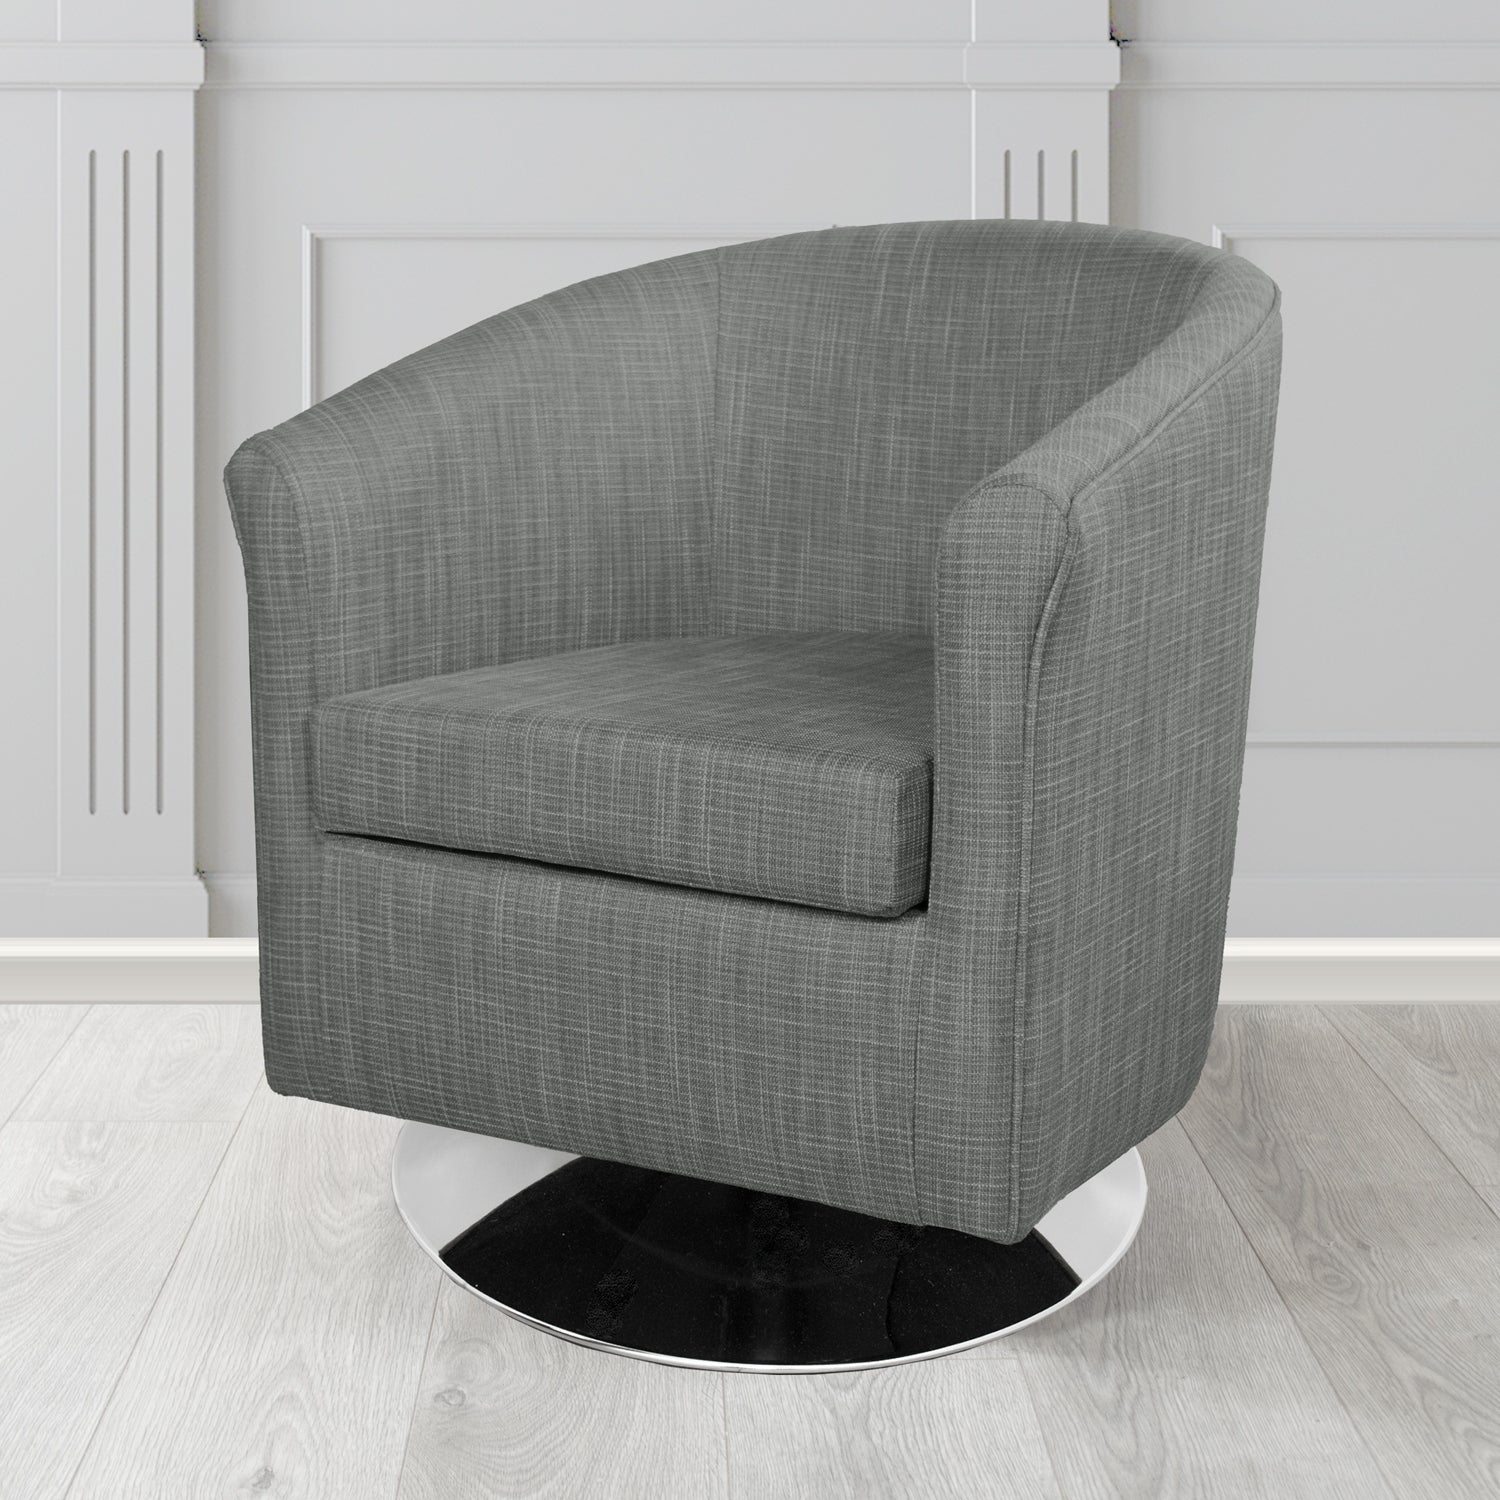 Tuscany Ravel Zinc Contract Crib 5 Fabric Swivel Tub Chair - Antimicrobial & Water-Resistant - The Tub Chair Shop